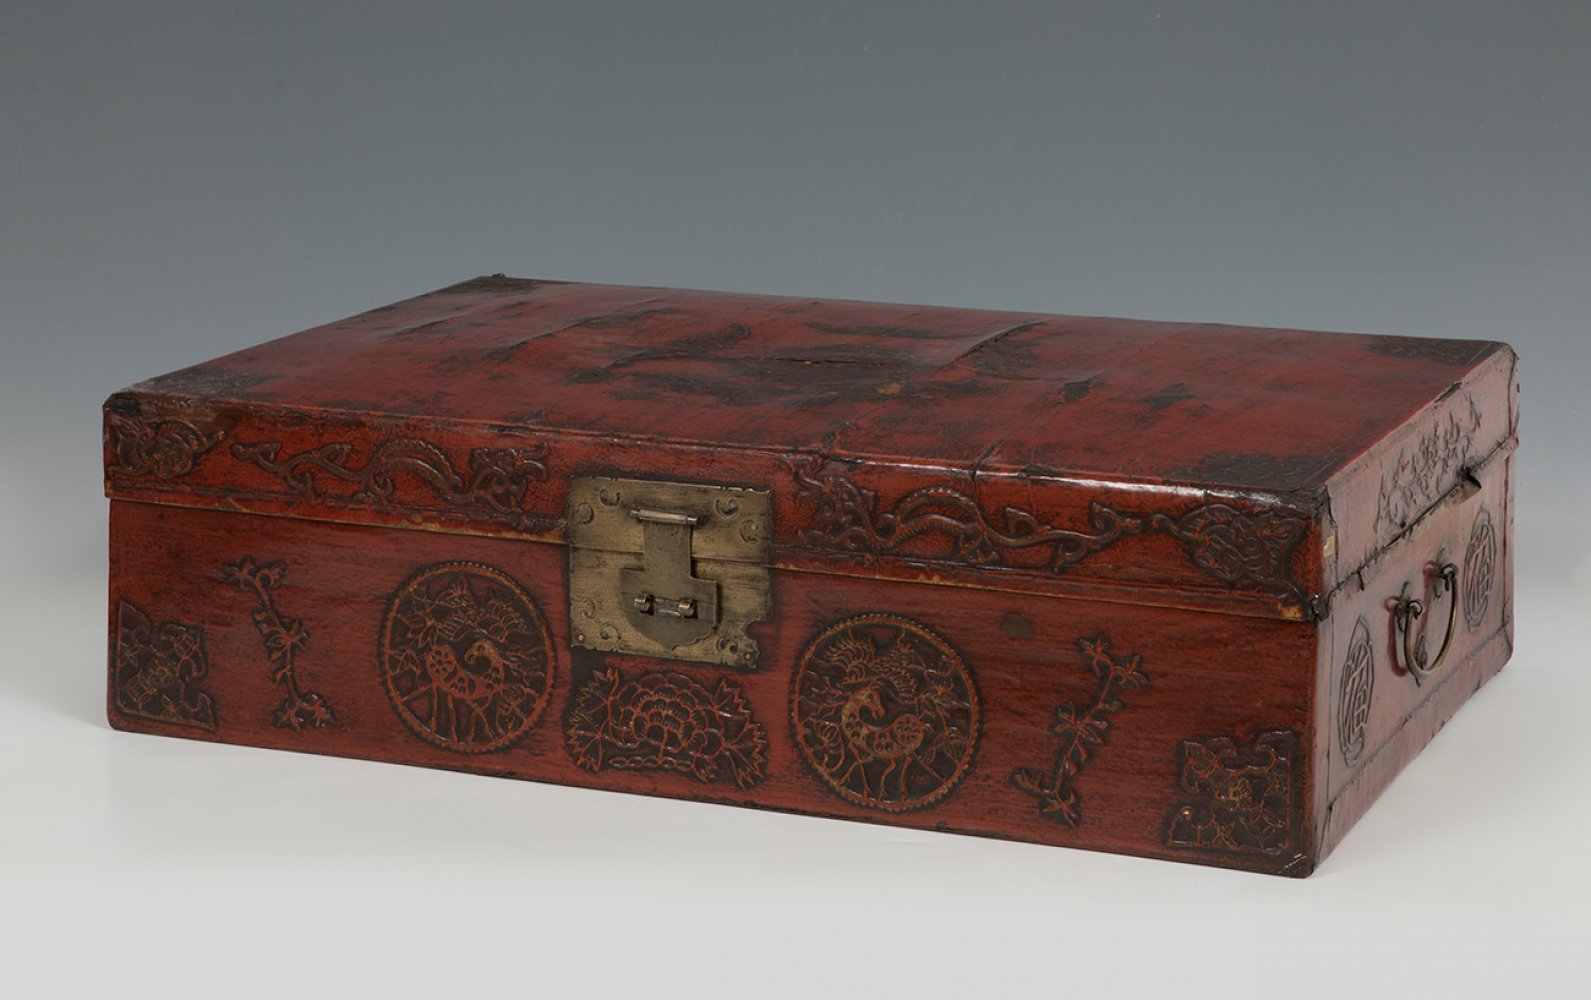 Chest. China, 19th century.Lacquered leather and wooden core.There are cracks on the surface.It